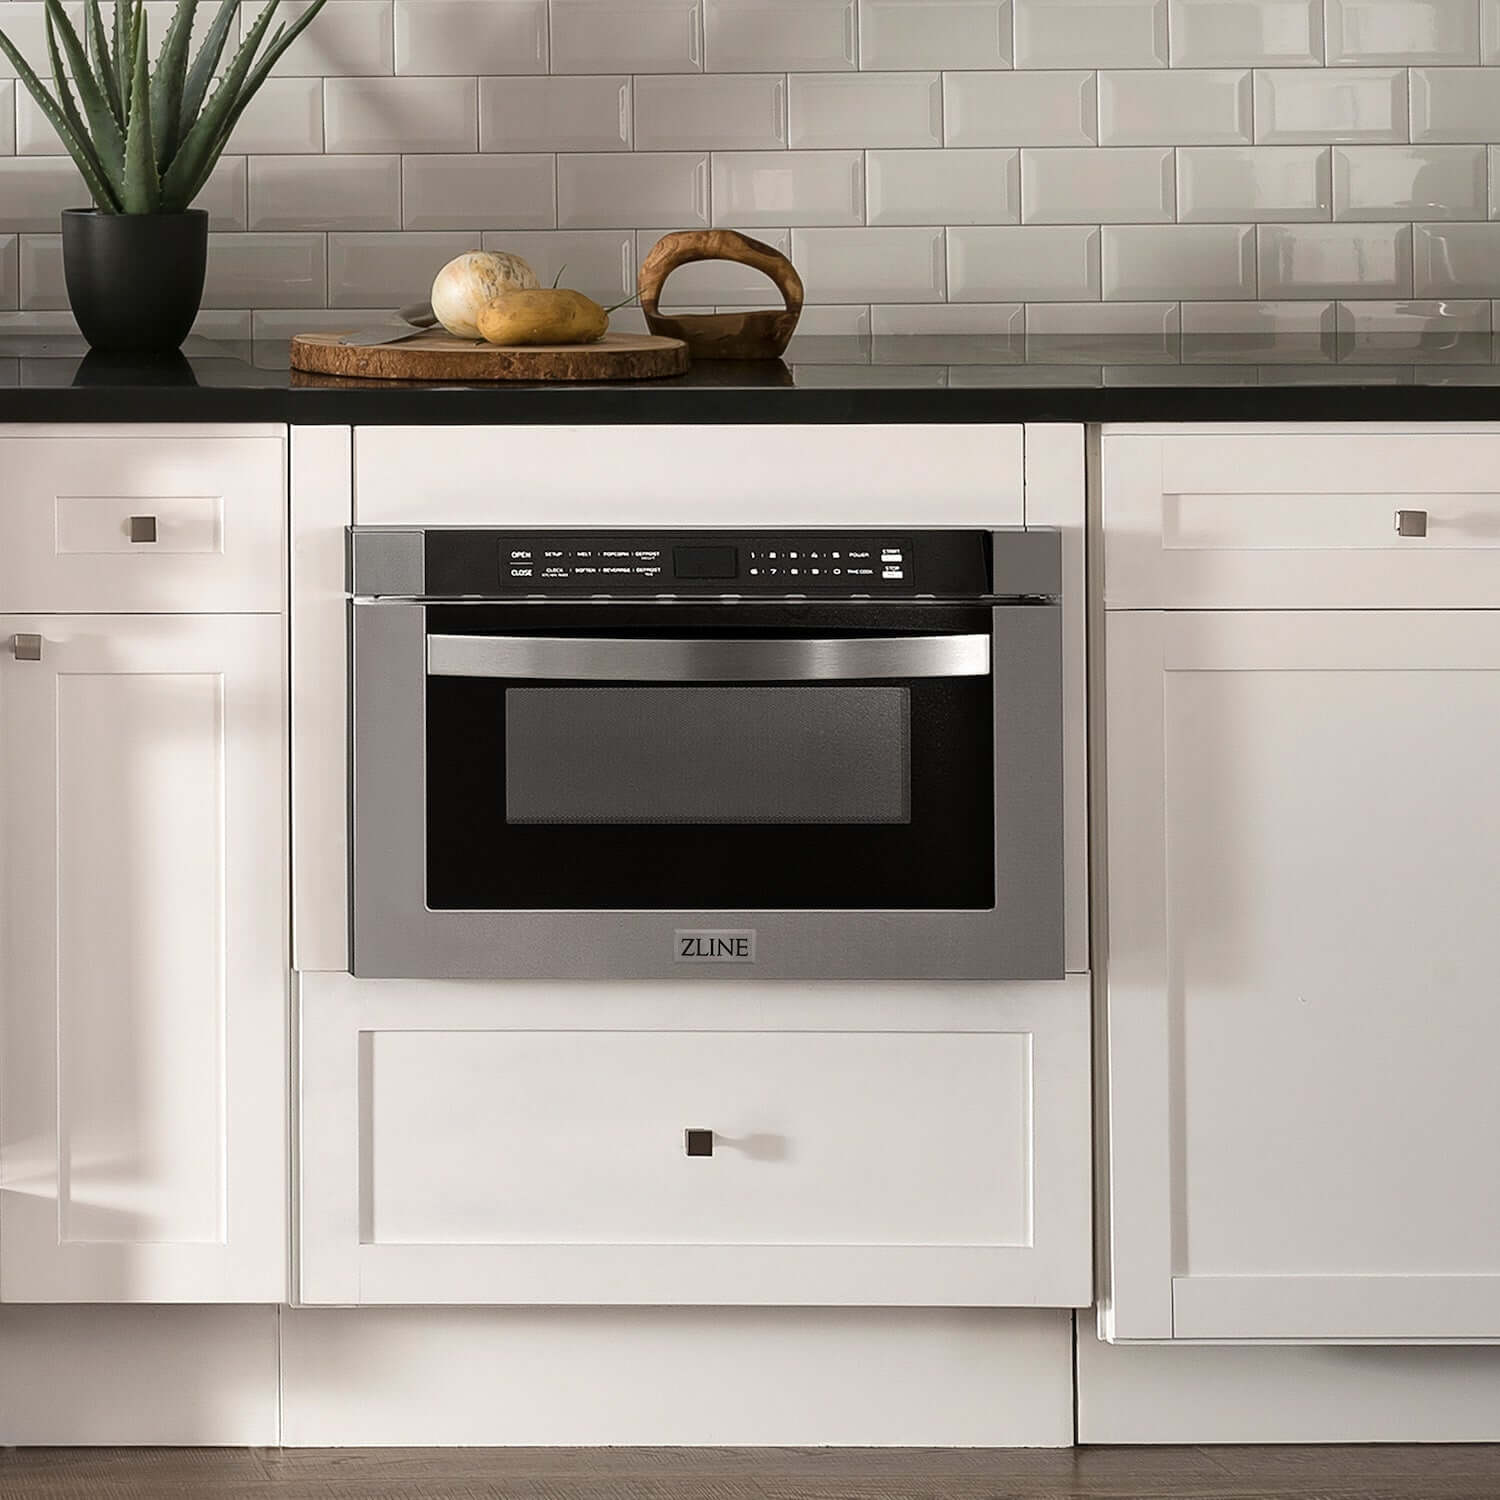 ZLINE 24" Built-in Microwave Drawer installed into white cabinets in a farmhouse-style kitchen.